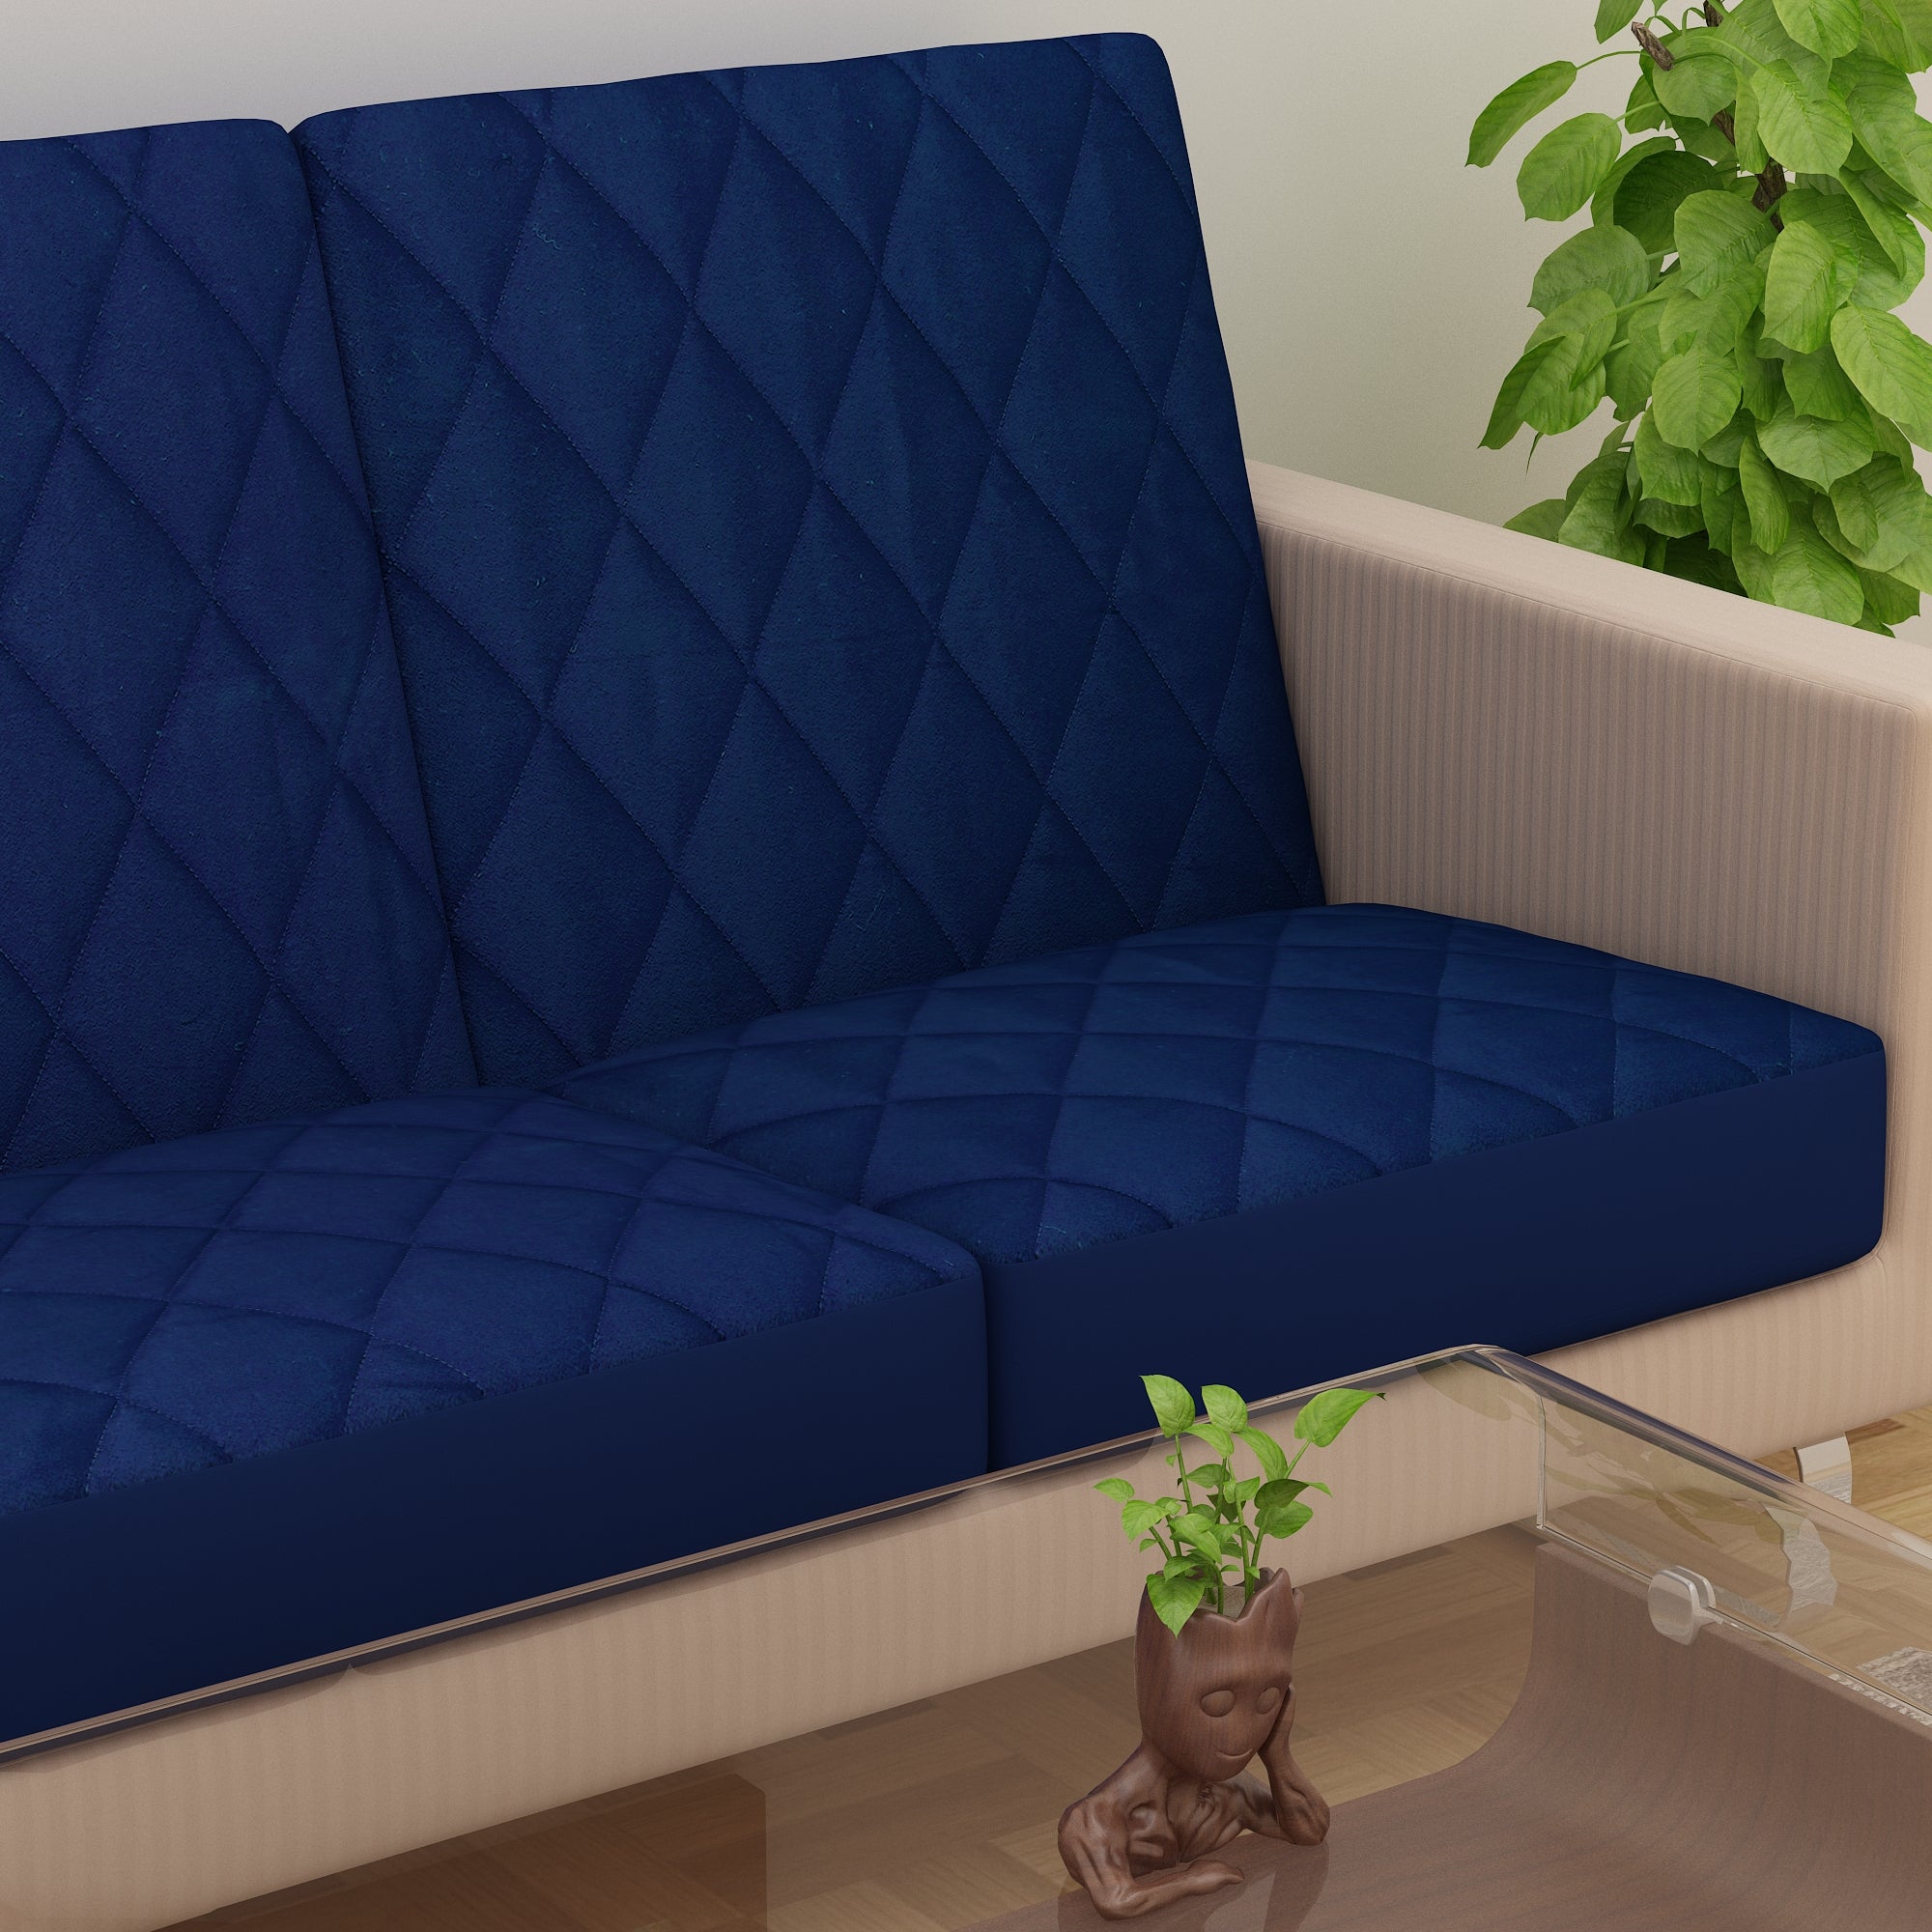 Sapphire Quilted Waterproof Sofa Seat Protector Cover with Stretchable Elastic, Blue